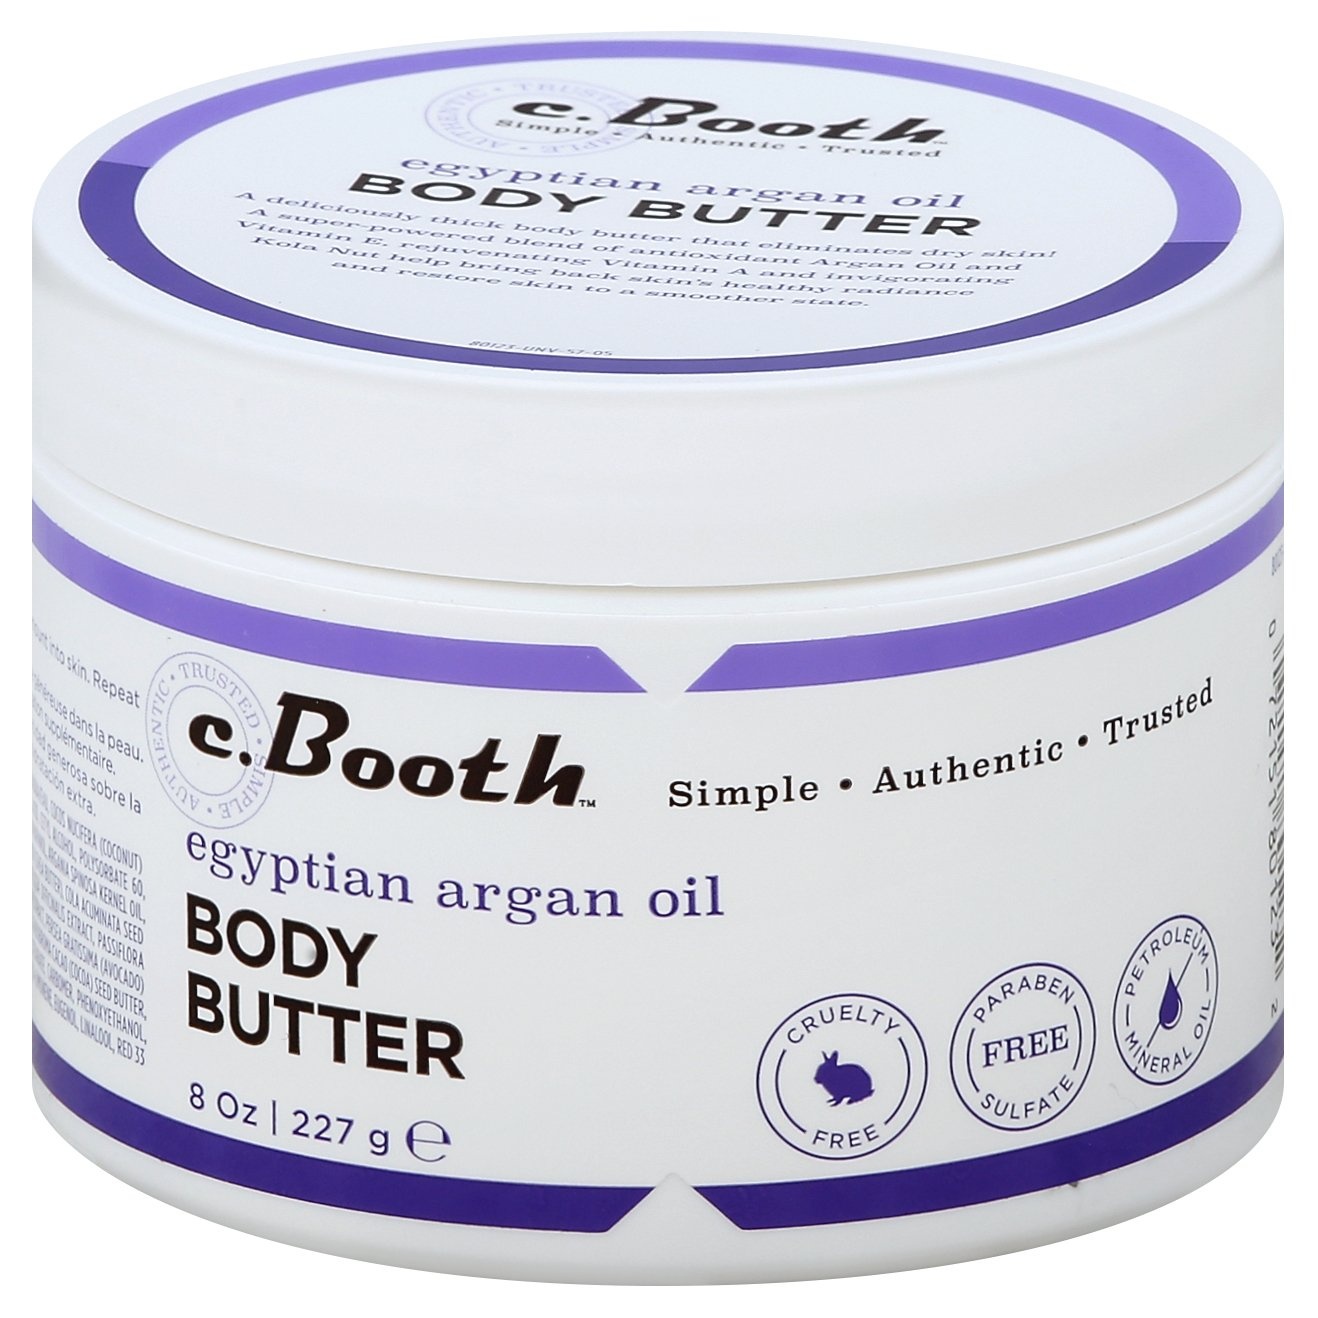 slide 1 of 1, c. Booth Body Butter 8 oz, 8 oz